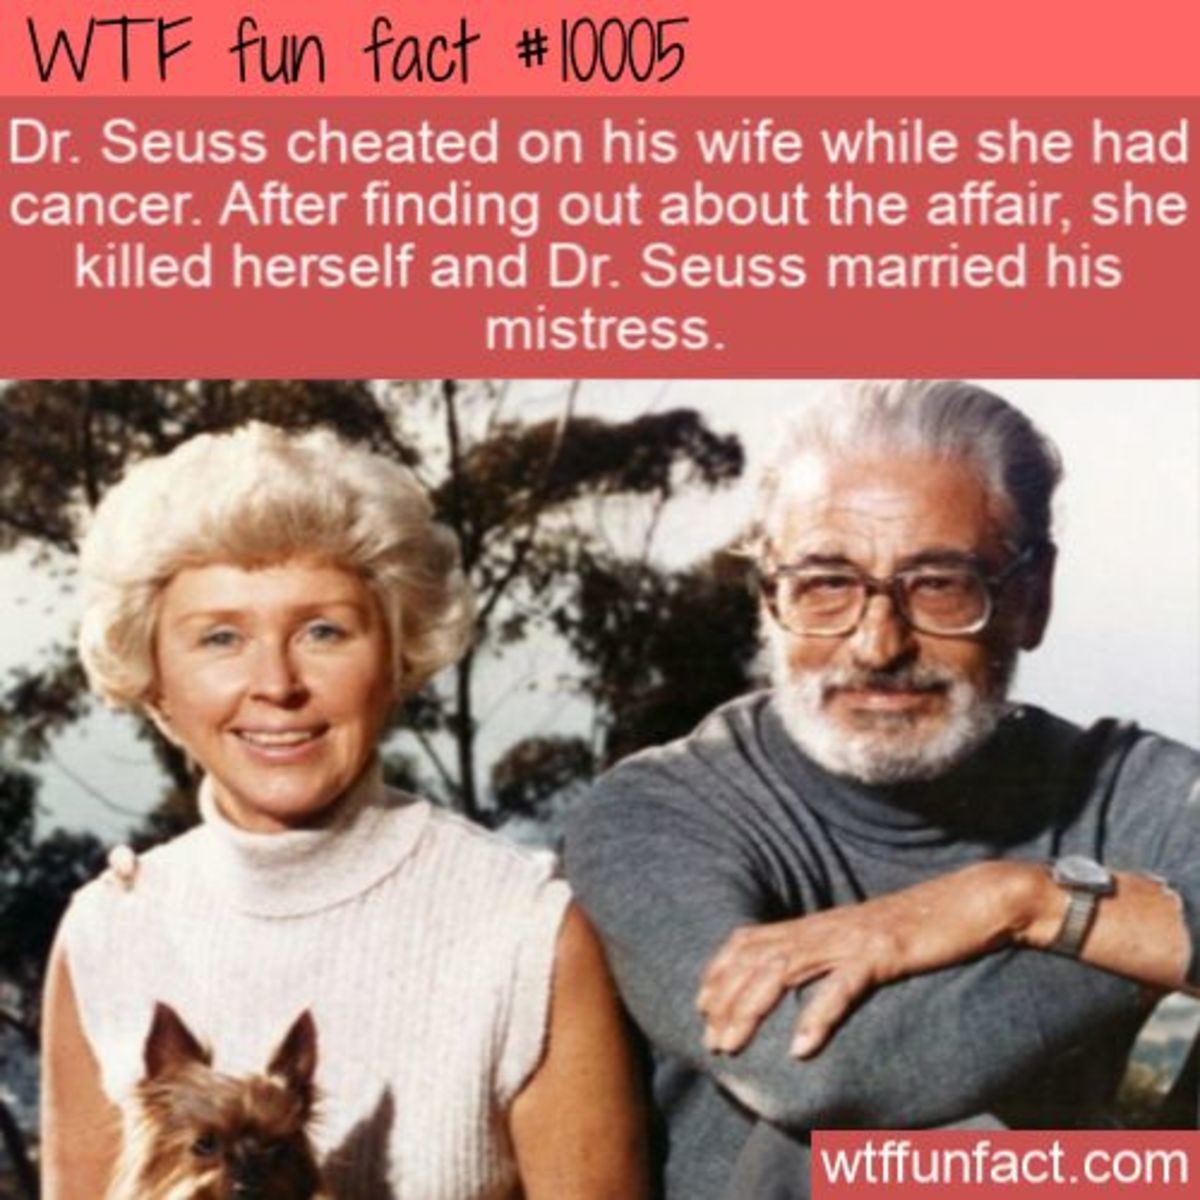 Dr seuss cheating on his wife